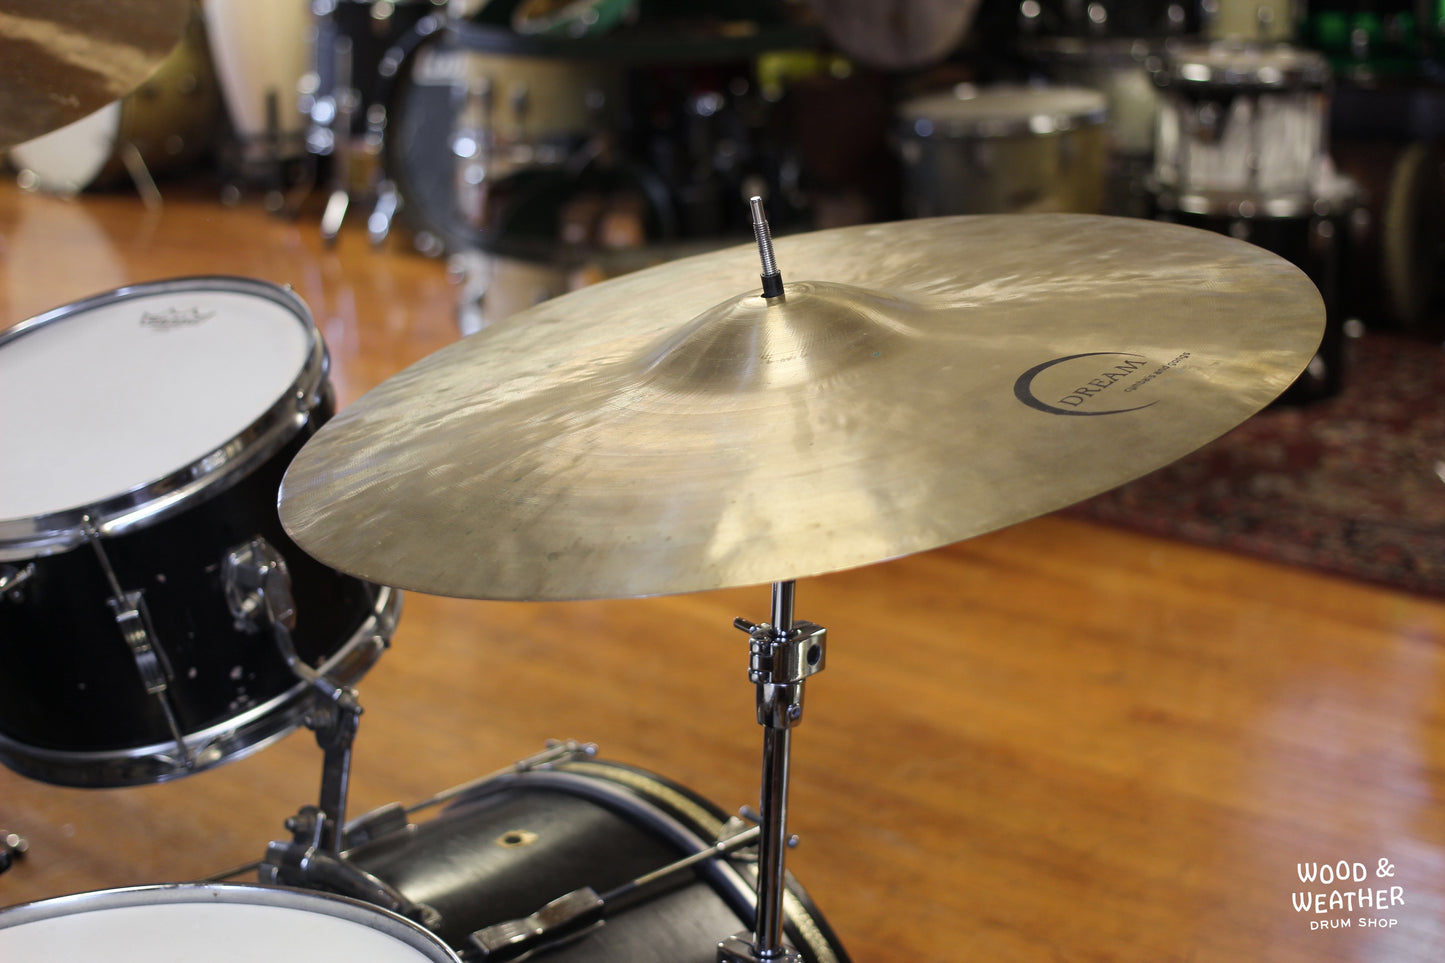 Used Dream 22" Ride Cymbal 2270g